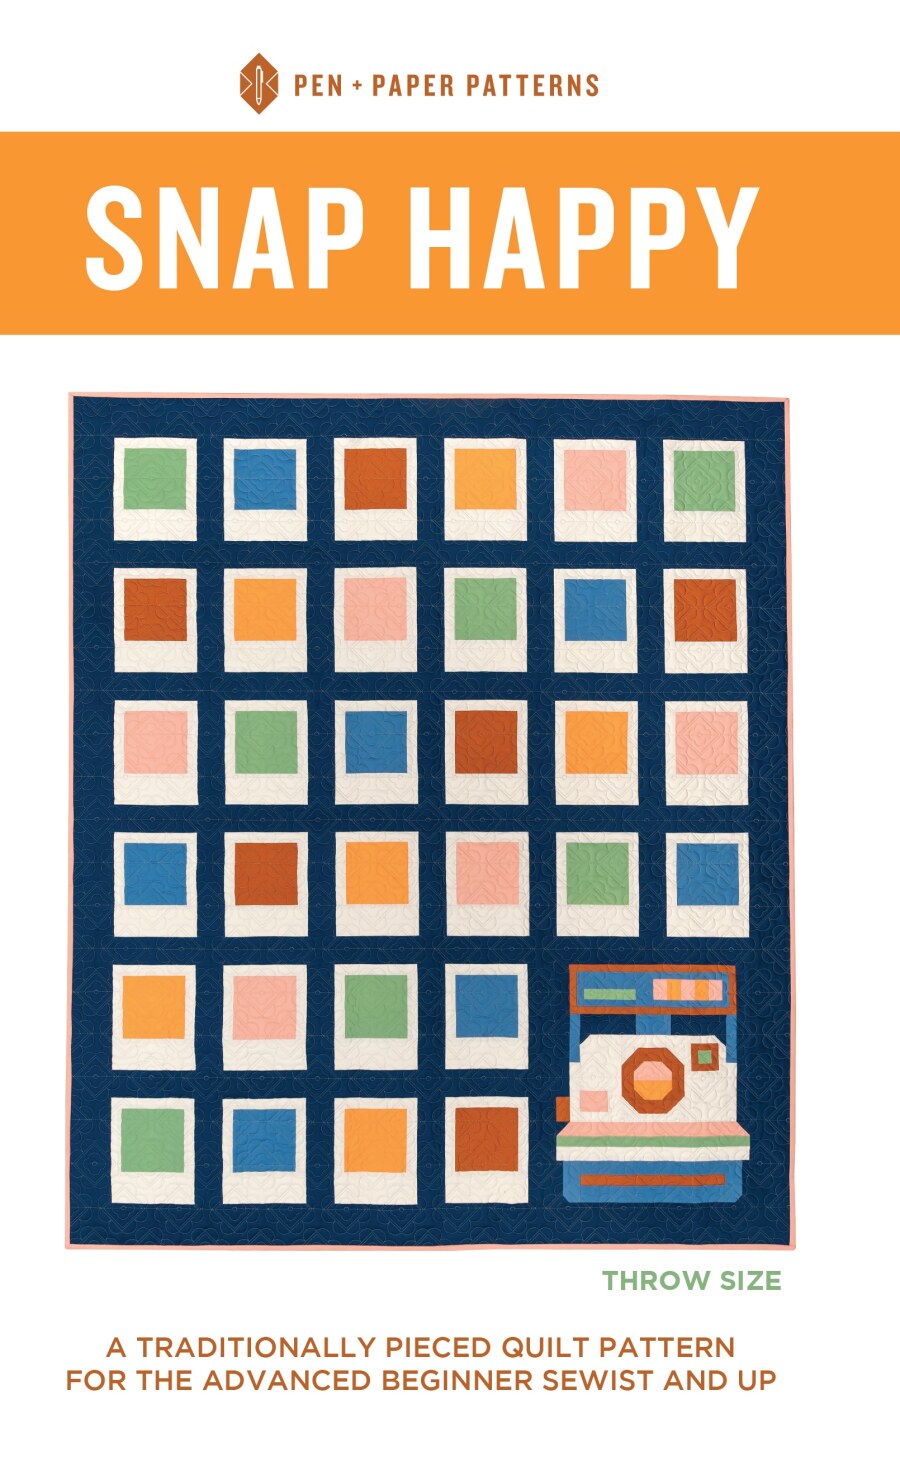 Snap Happy Quilt Pattern By Pen + Paper (Due May)